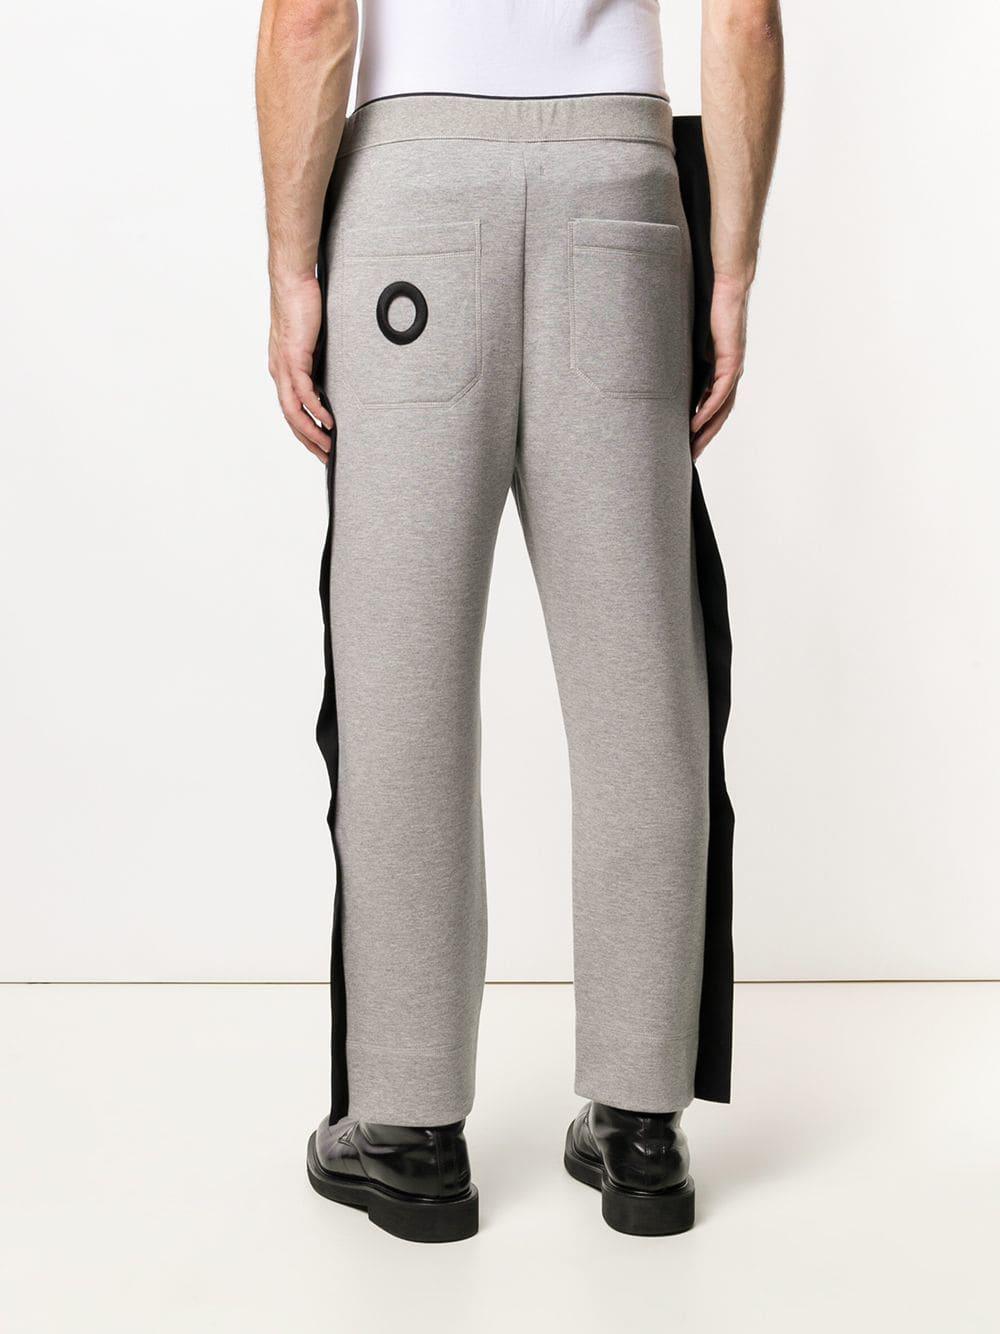 Craig Green Synthetic Fin Track Pants in Grey (Gray) for Men - Lyst